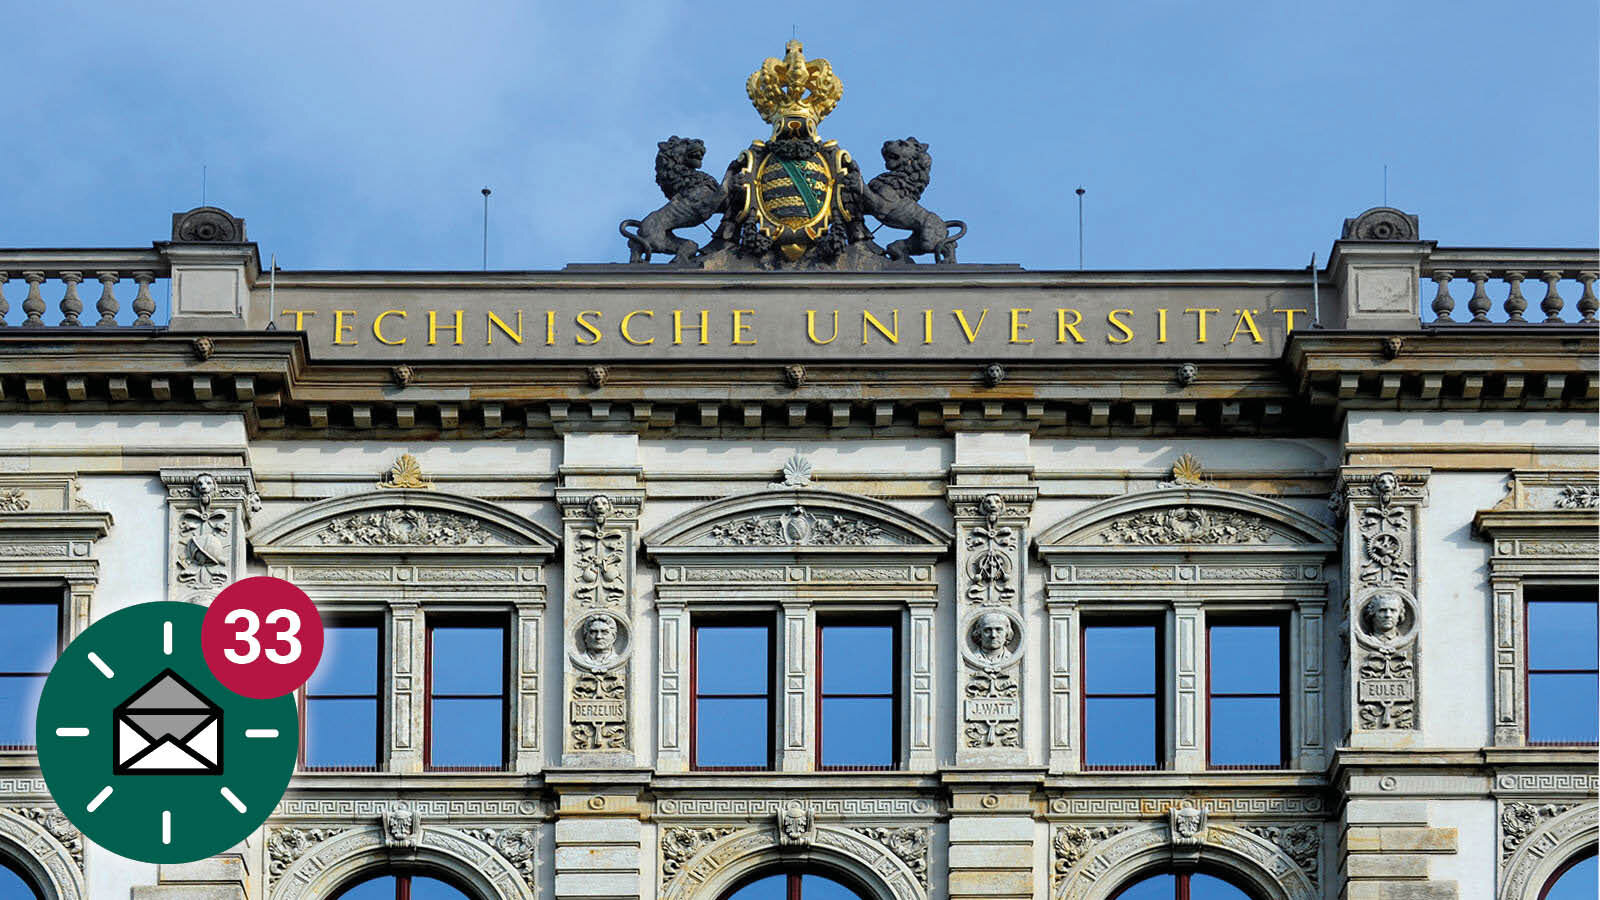 Main building of Chemnitz University of Technology with focus on the crown and an mail icon with the number "7".